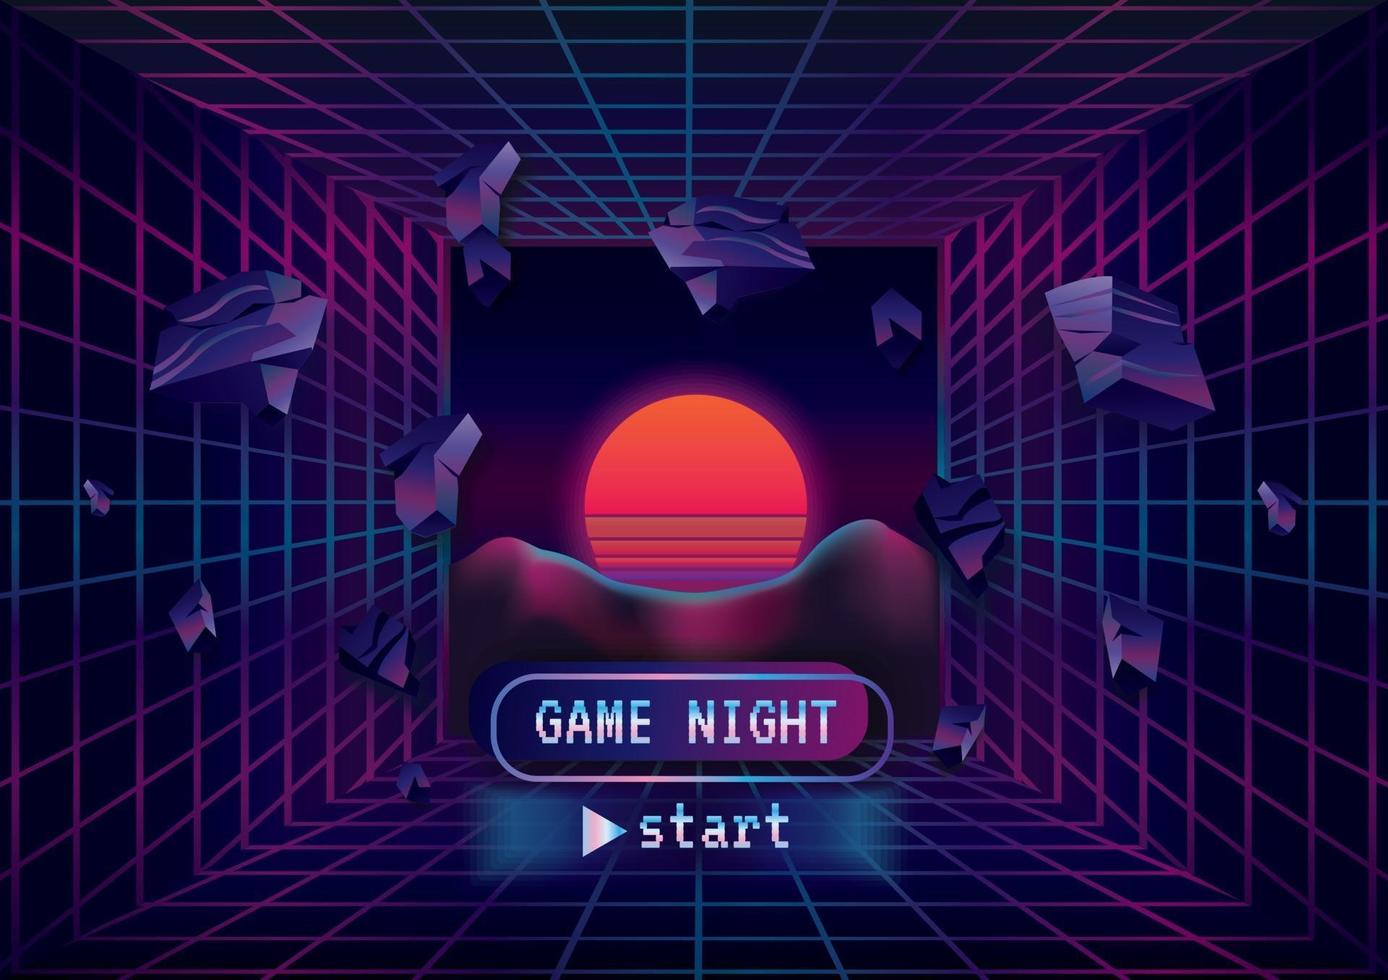 Game zone game icon on galaxy room background vector